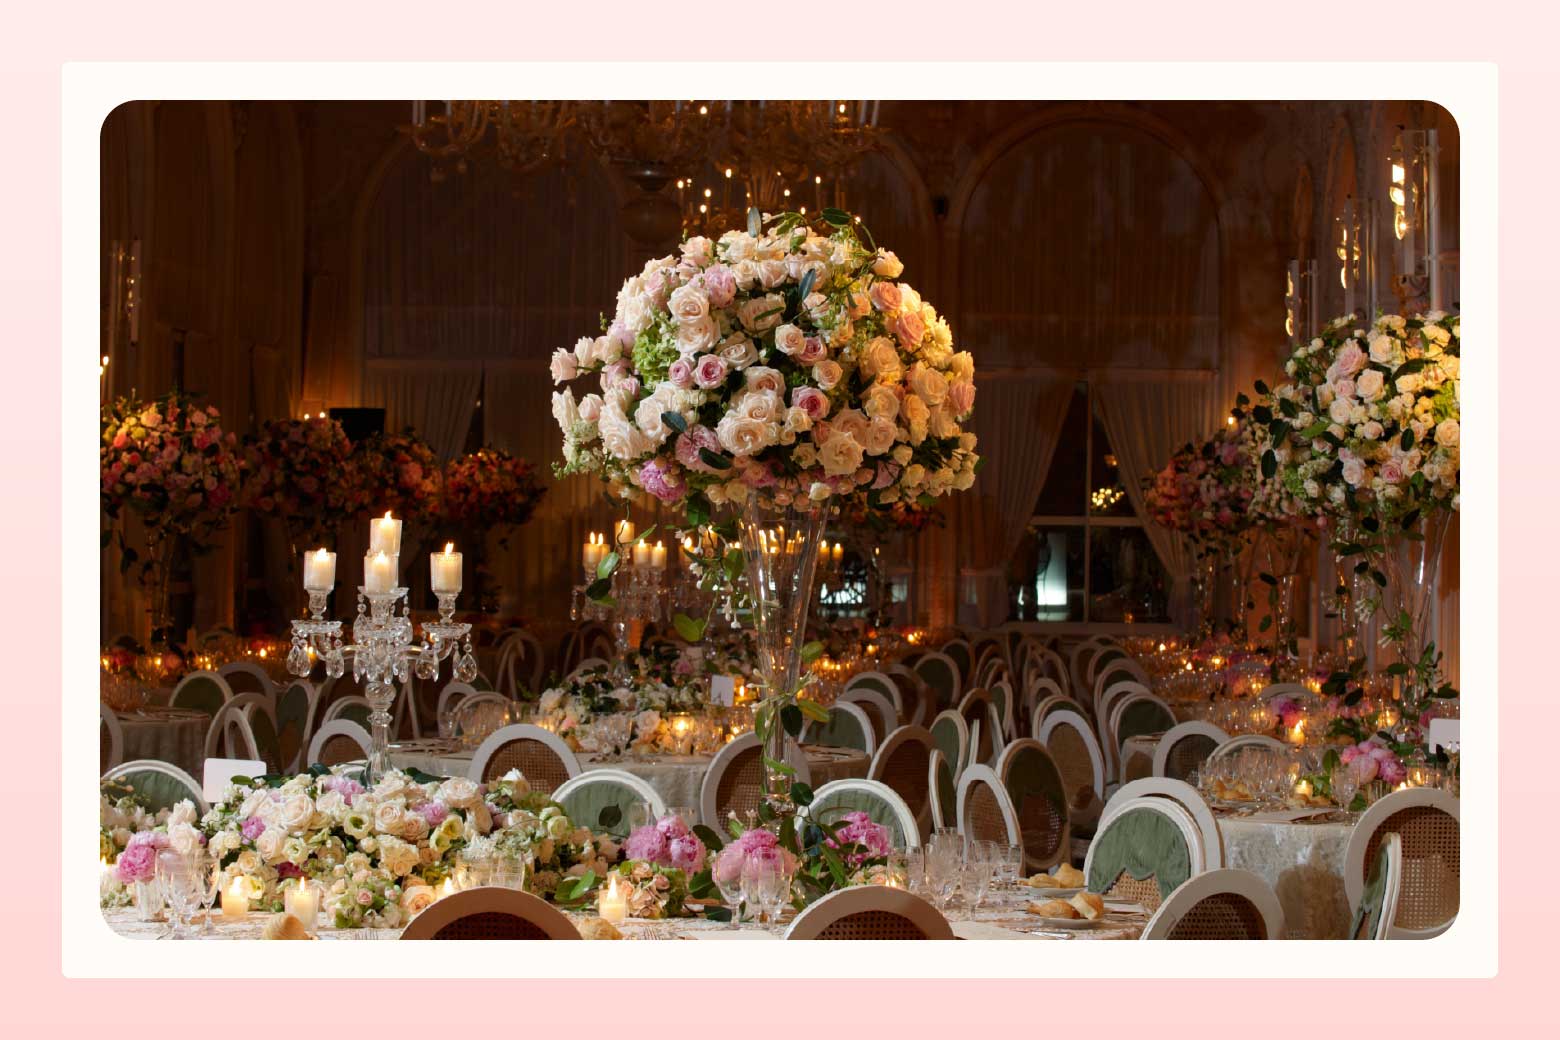 Elaborate wedding reception set-up with tables with candelabras and tall centerpieces of large bouquets or pale pink roses